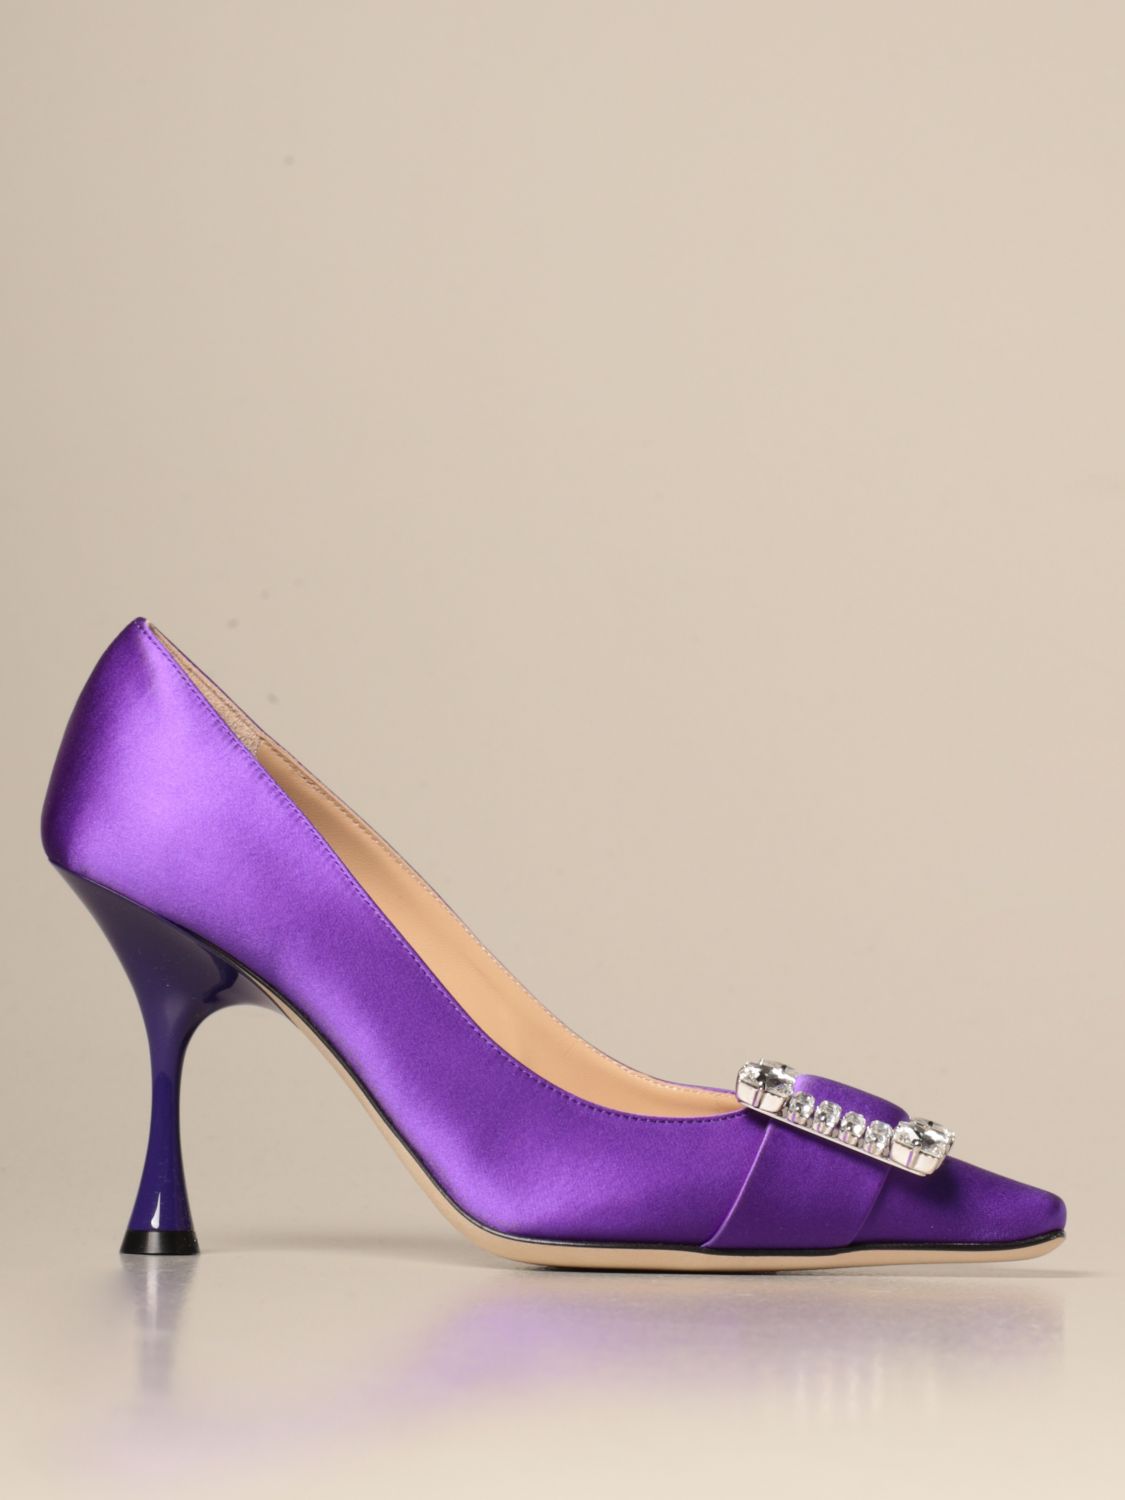 Sergio Rossi Outlet: décolleté in satin with jewel buckle | Pumps